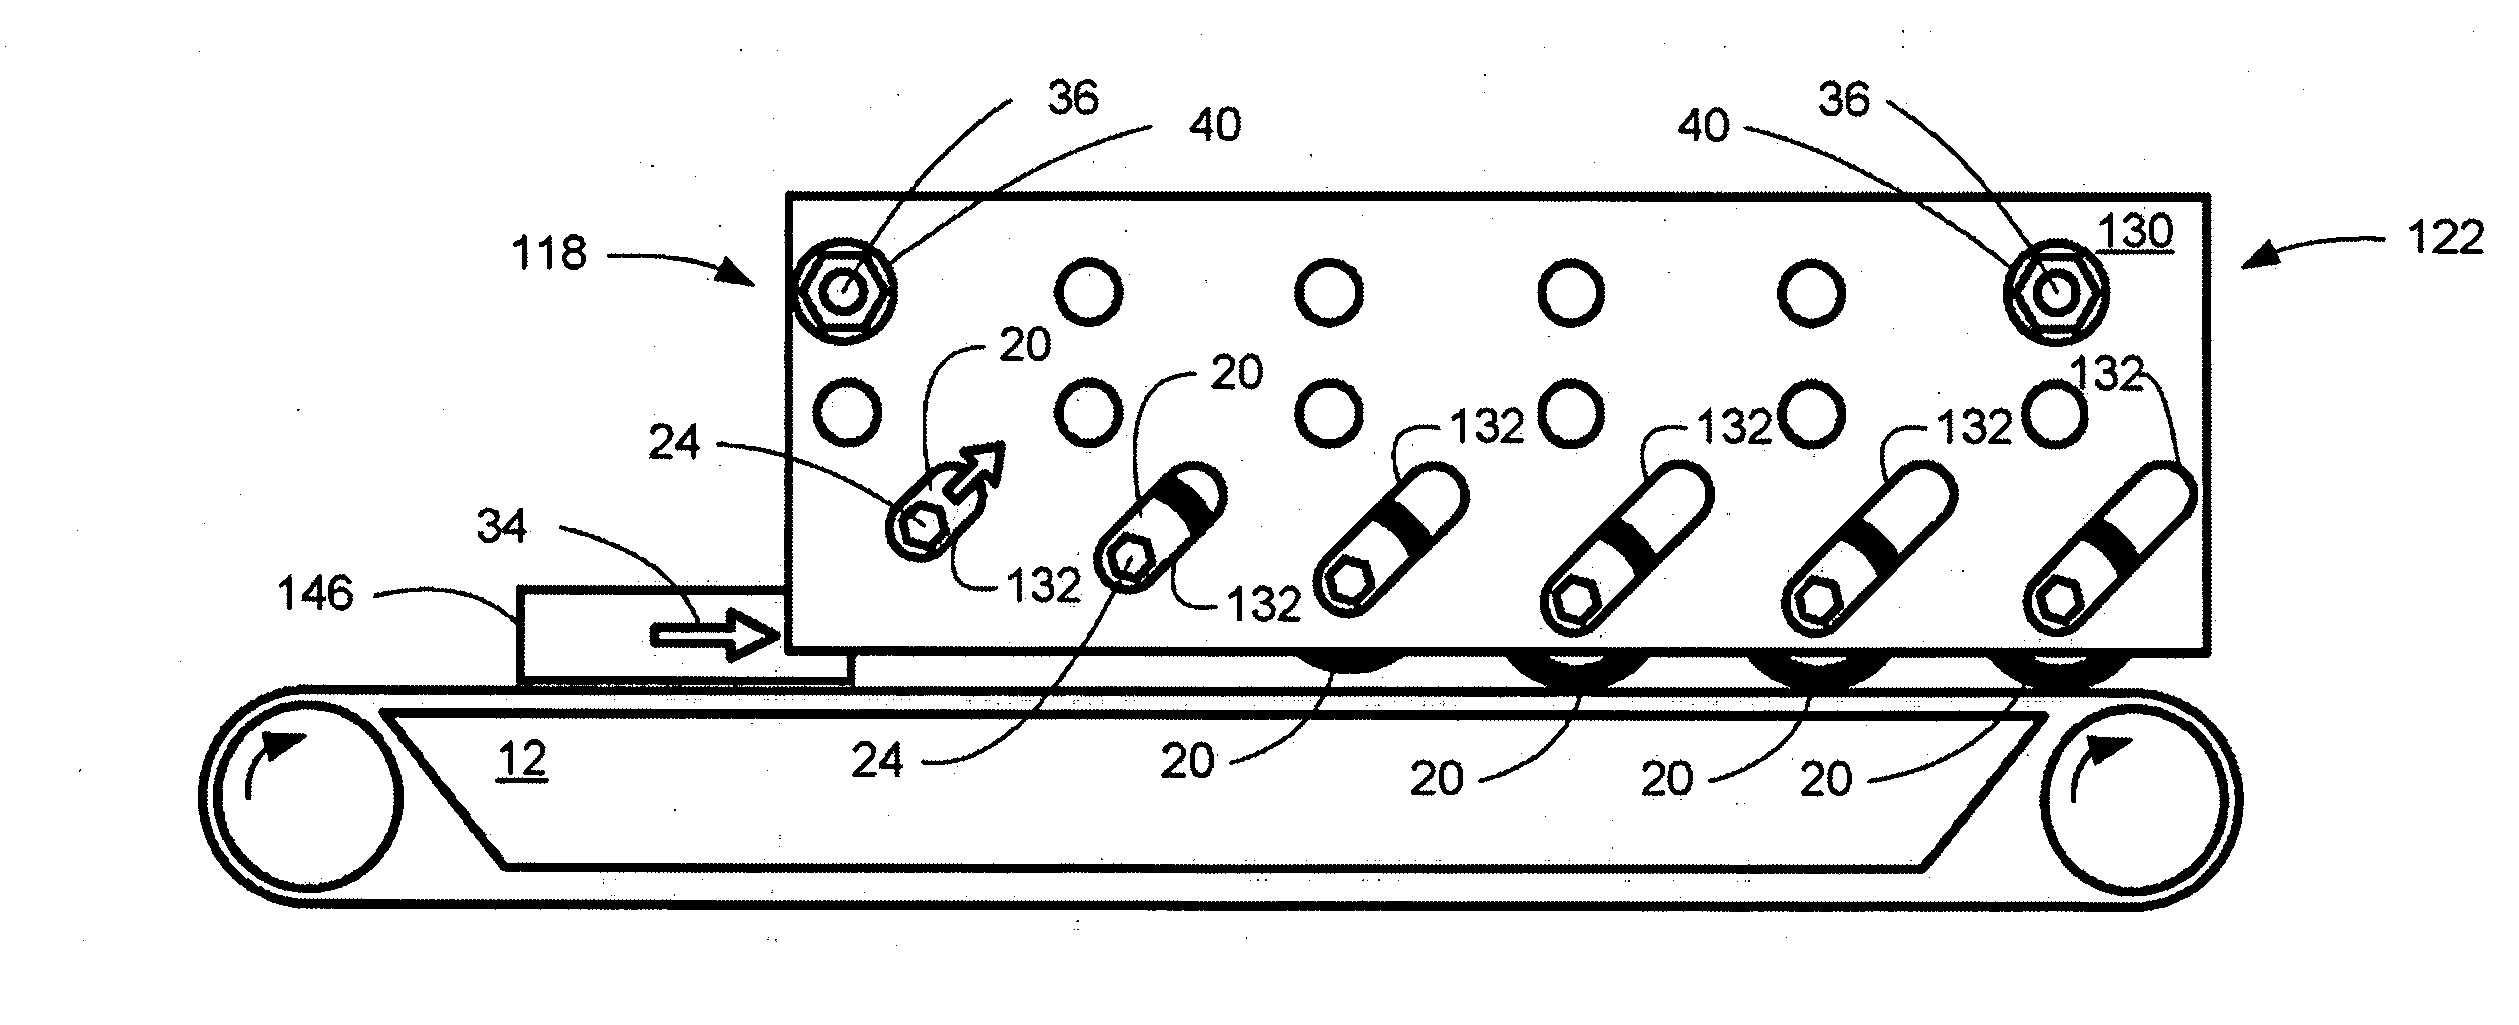 Apparatus for accommodating greater height variance of articles in shrink packaging machine